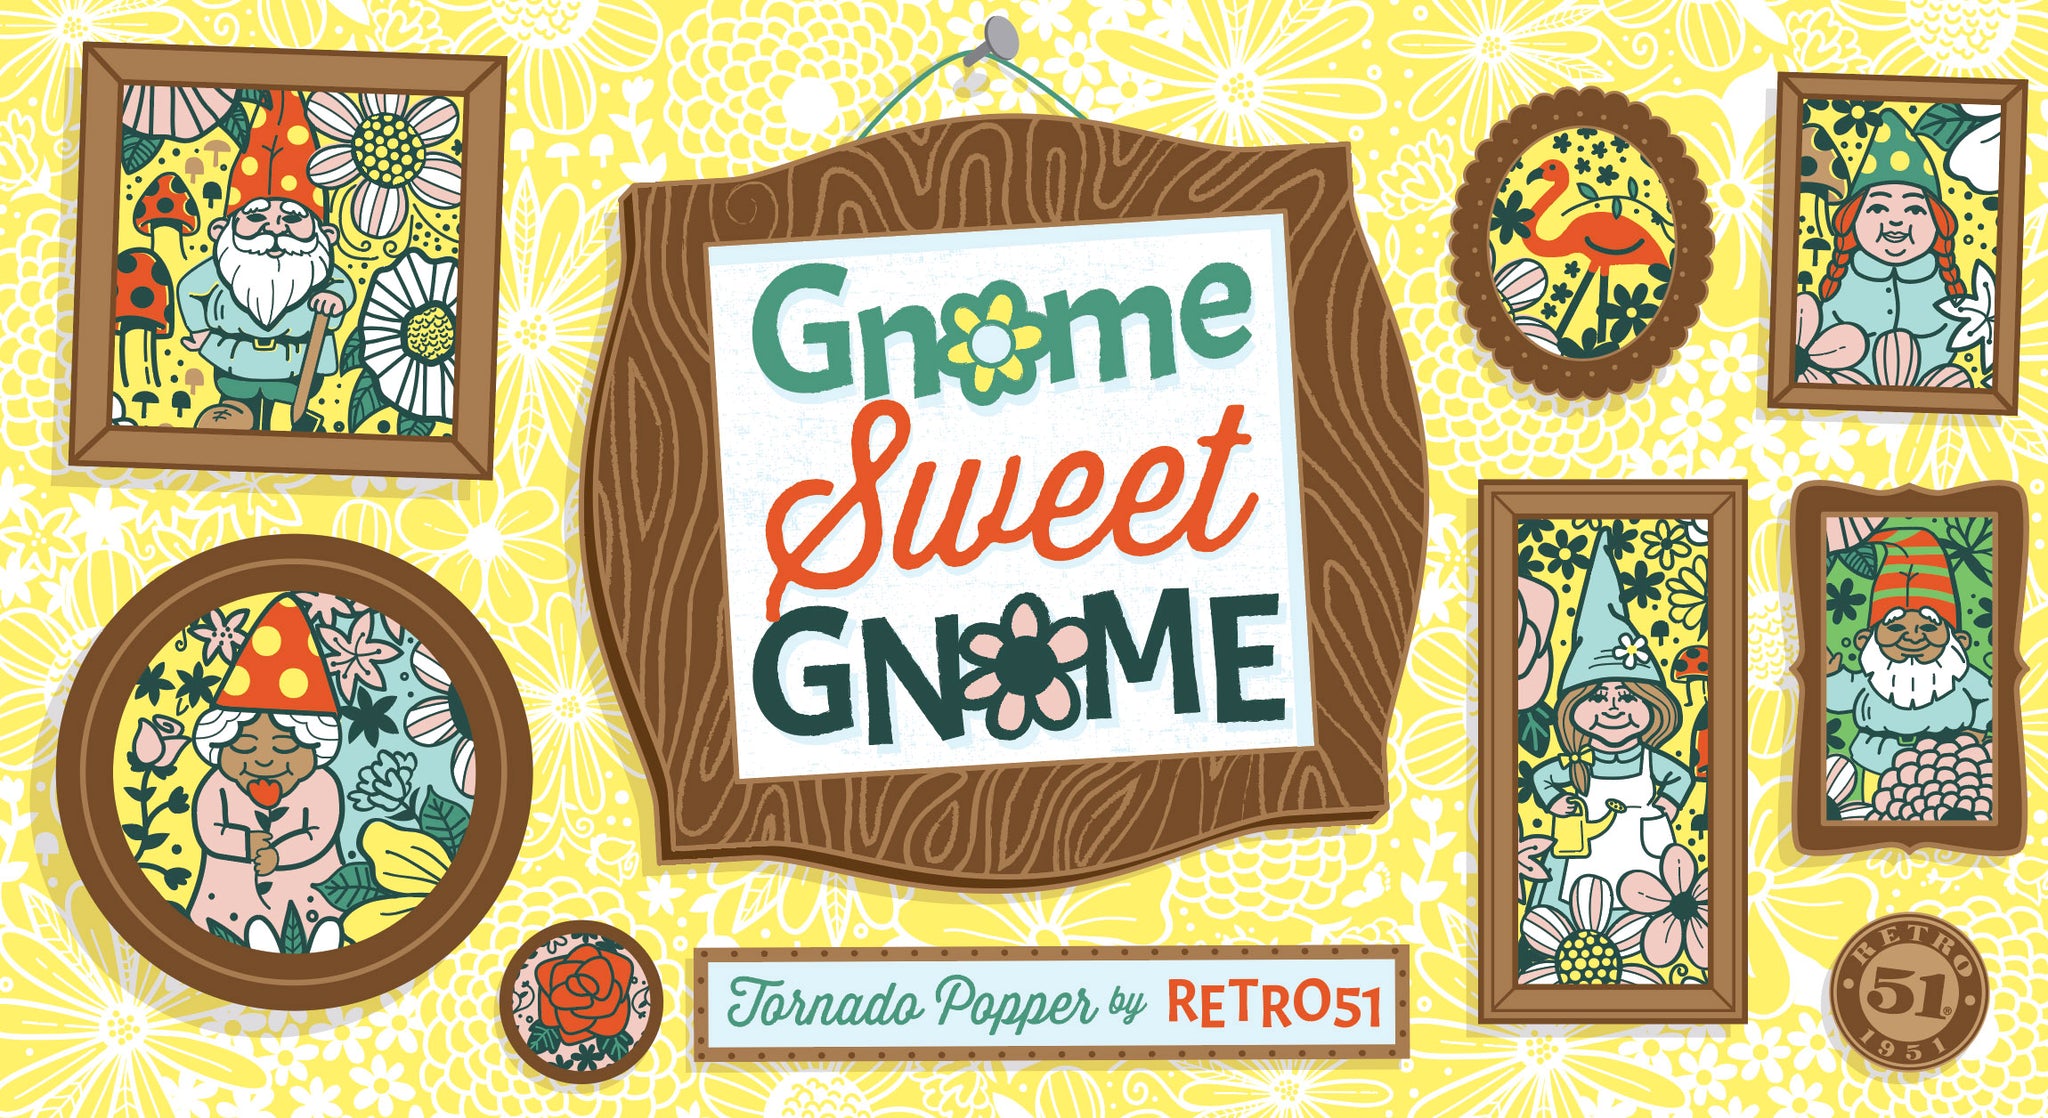 Gnome Sweet Gnome Limited Edition Popper June 8th 2021